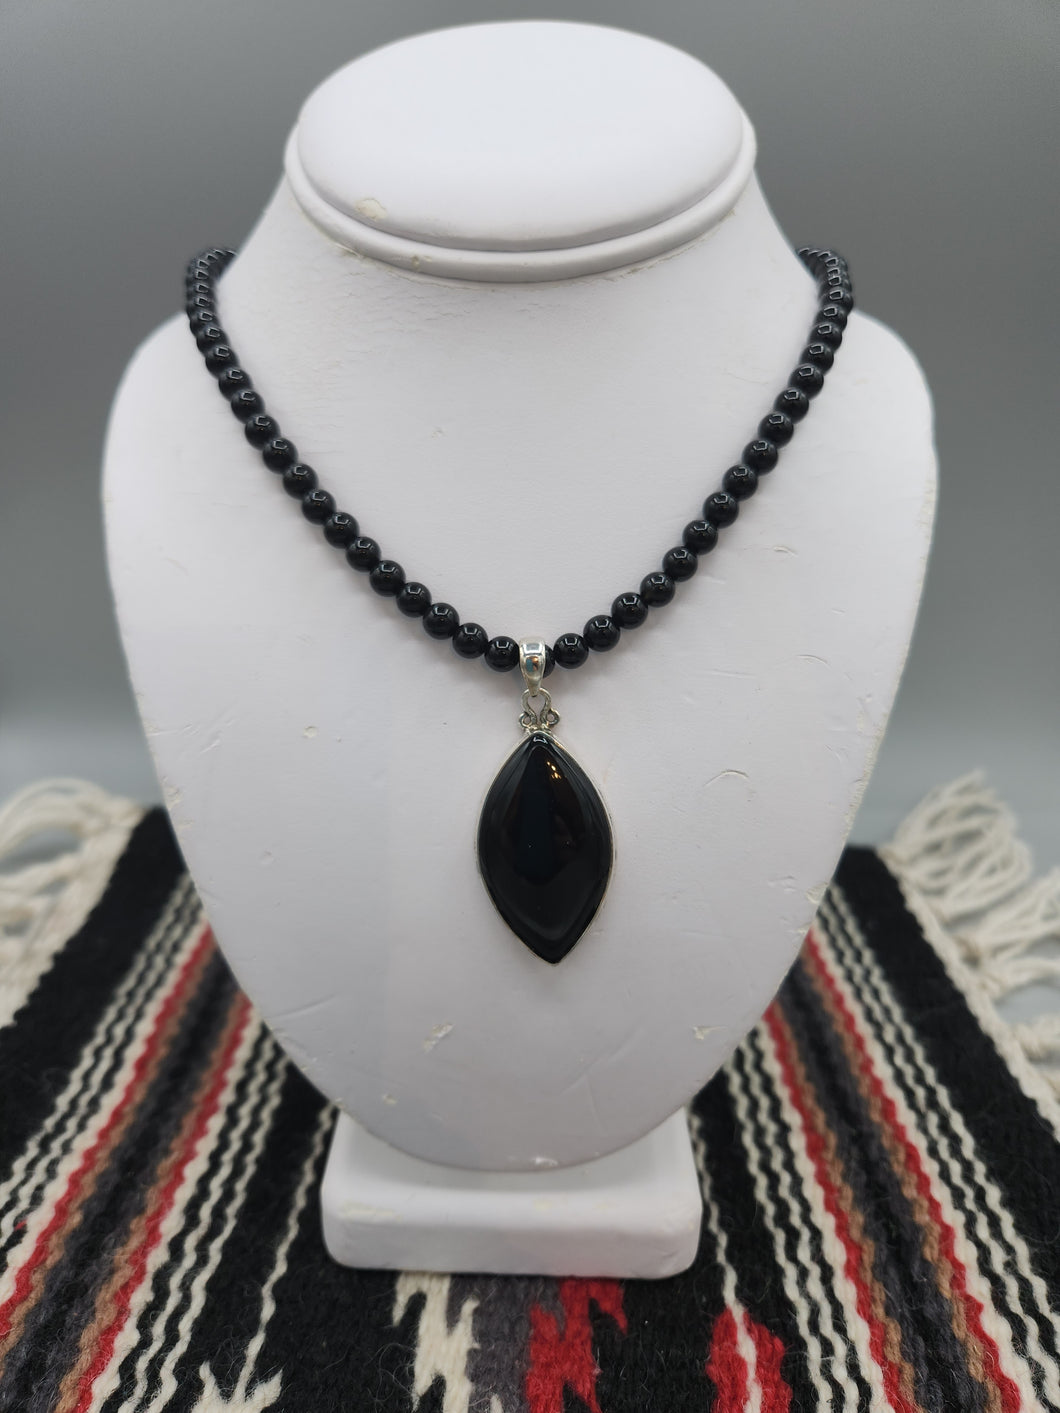 ONYX NECKLACE ON 6MM BEADS - 20